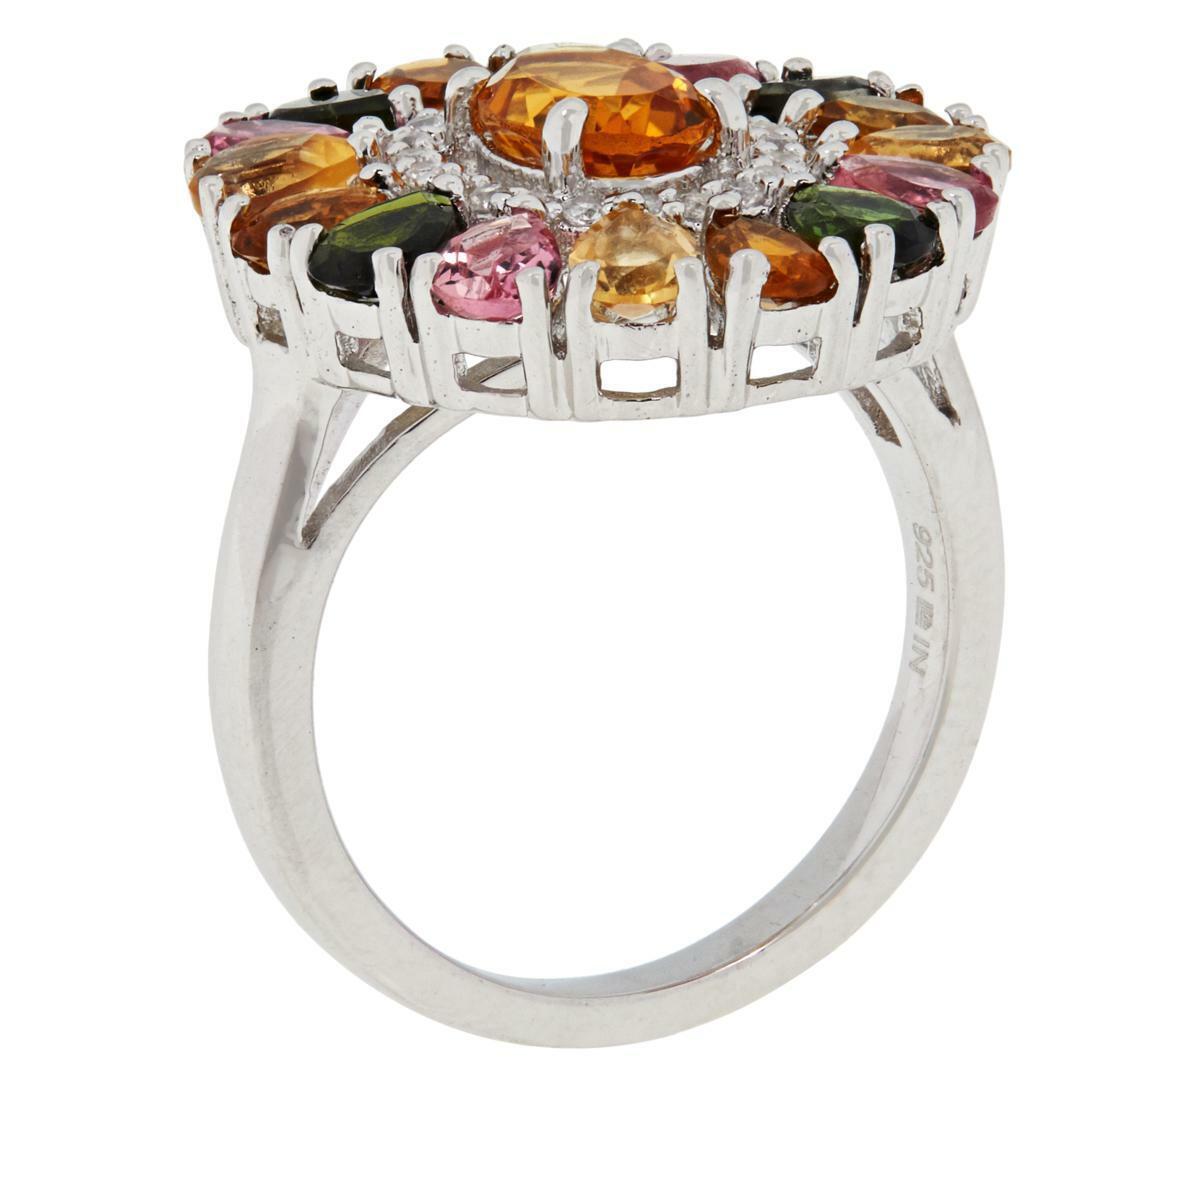 Colleen Lopez Sterling Silver Citrine and Multi Tourmaline Ring, Size 9